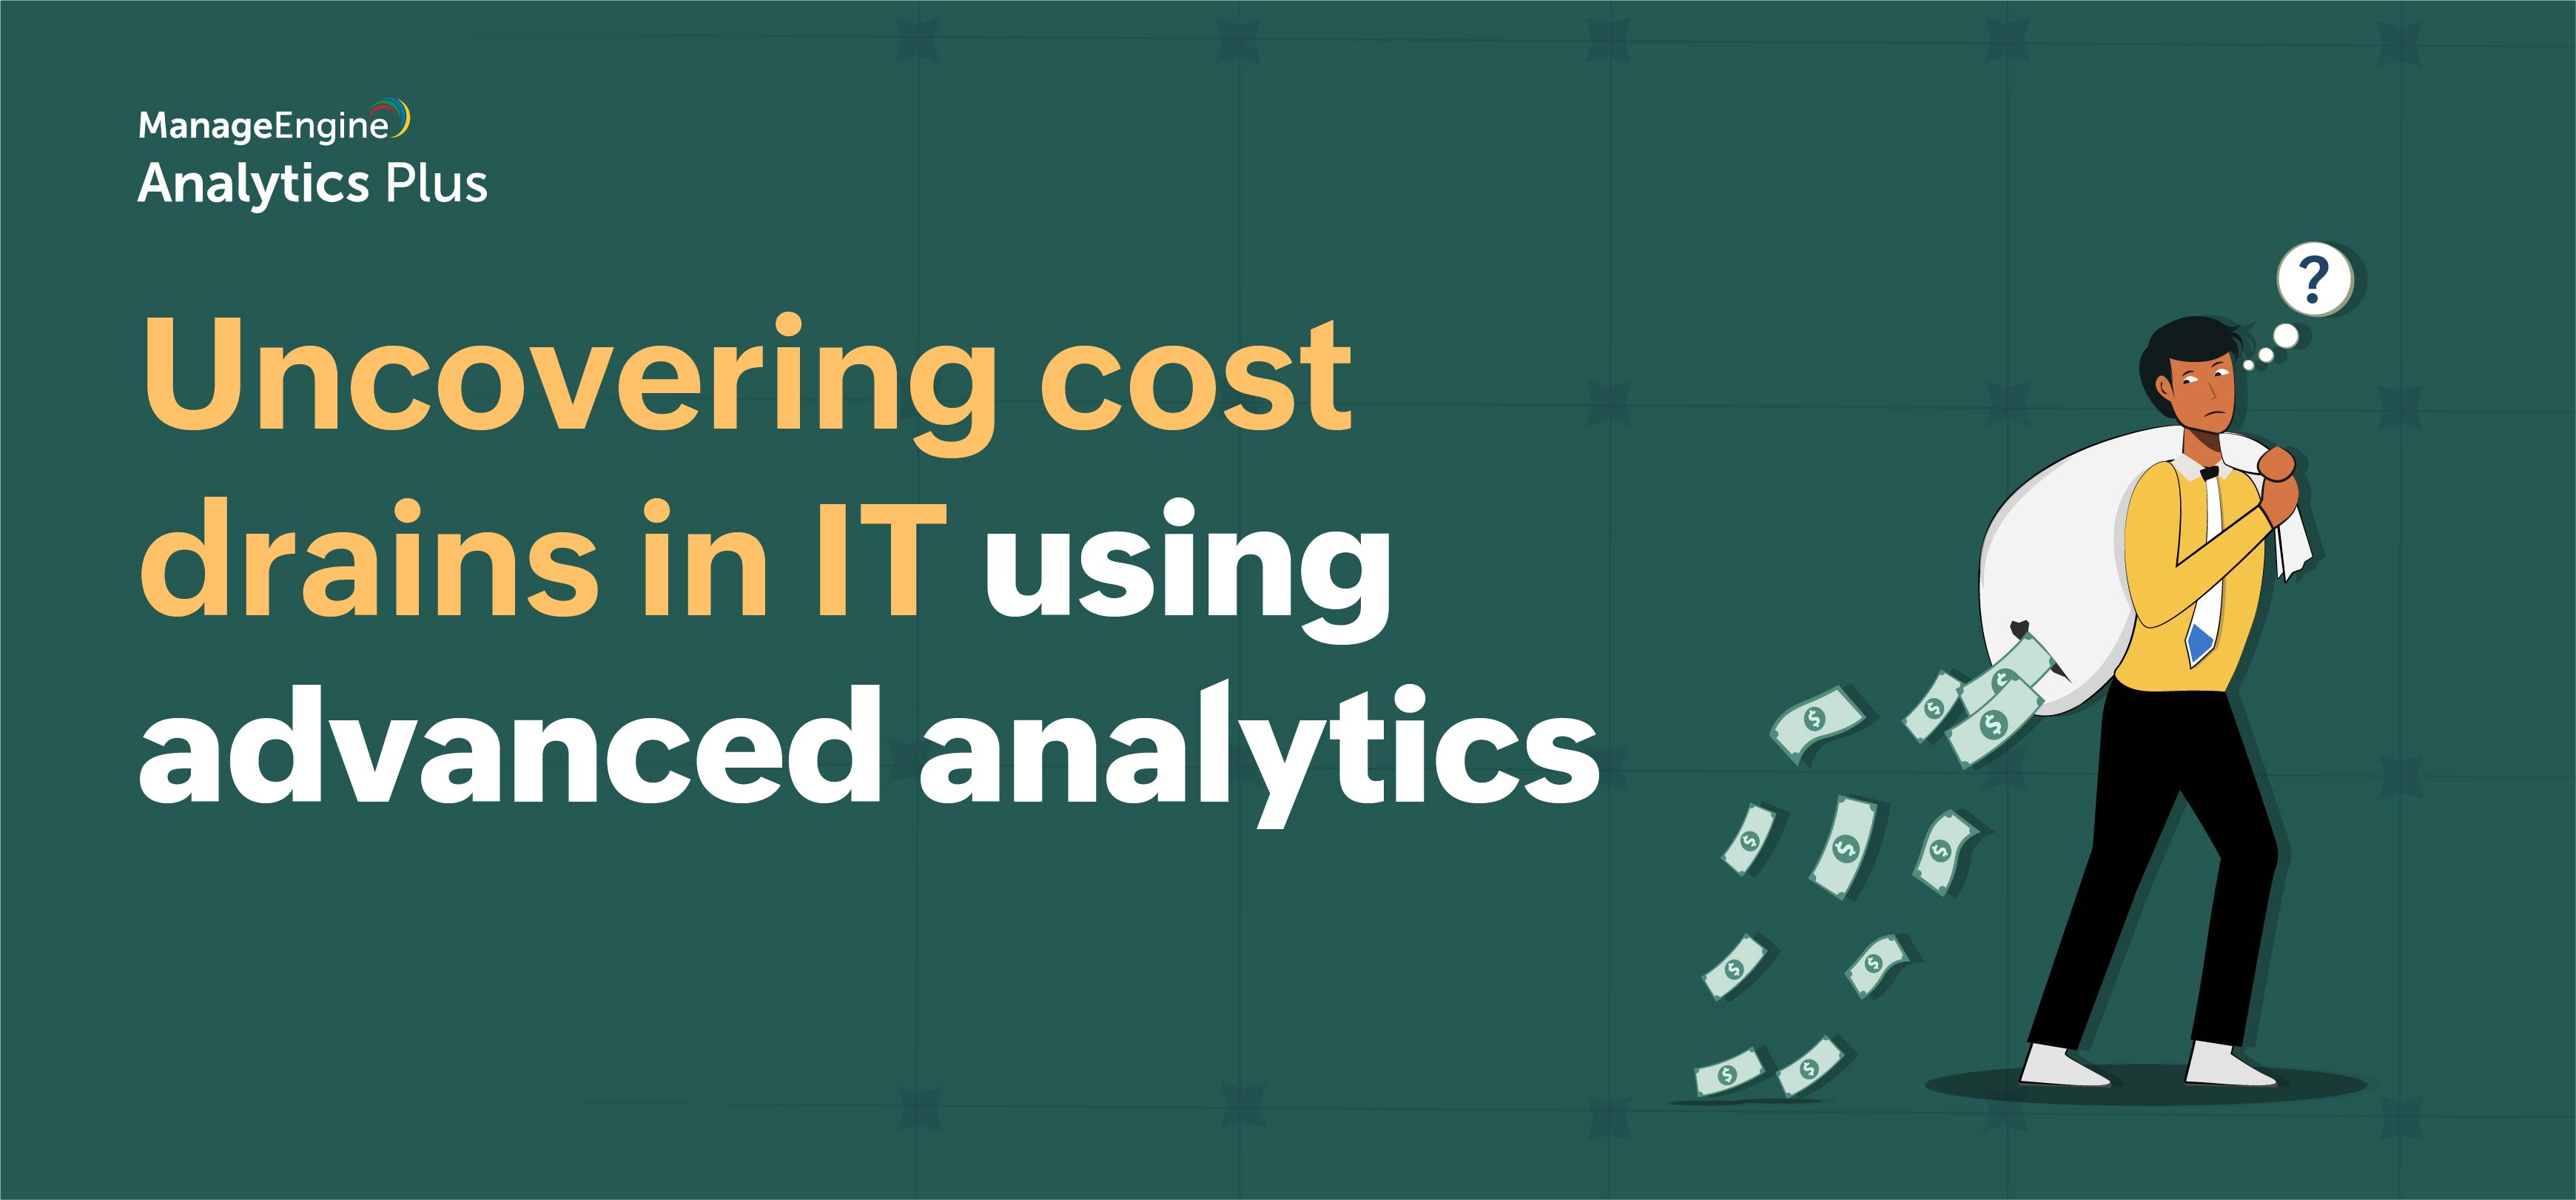 Uncovering cost drains in IT using advanced analytics